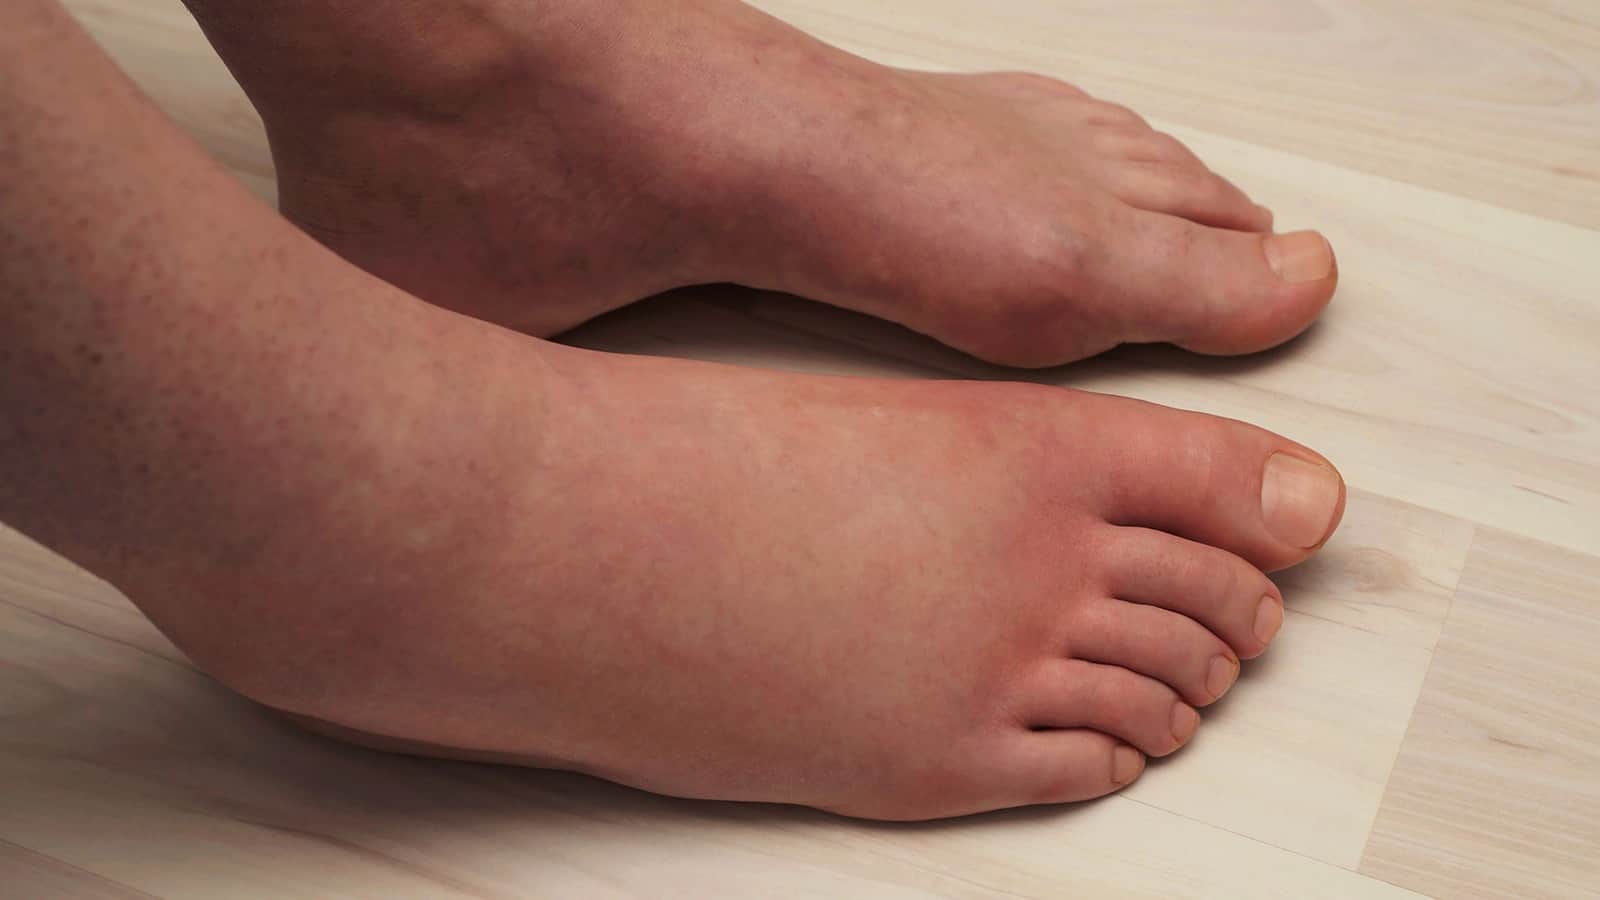 Scientists Explain 9 Things That Cause Swollen Legs (And How to Fix It)